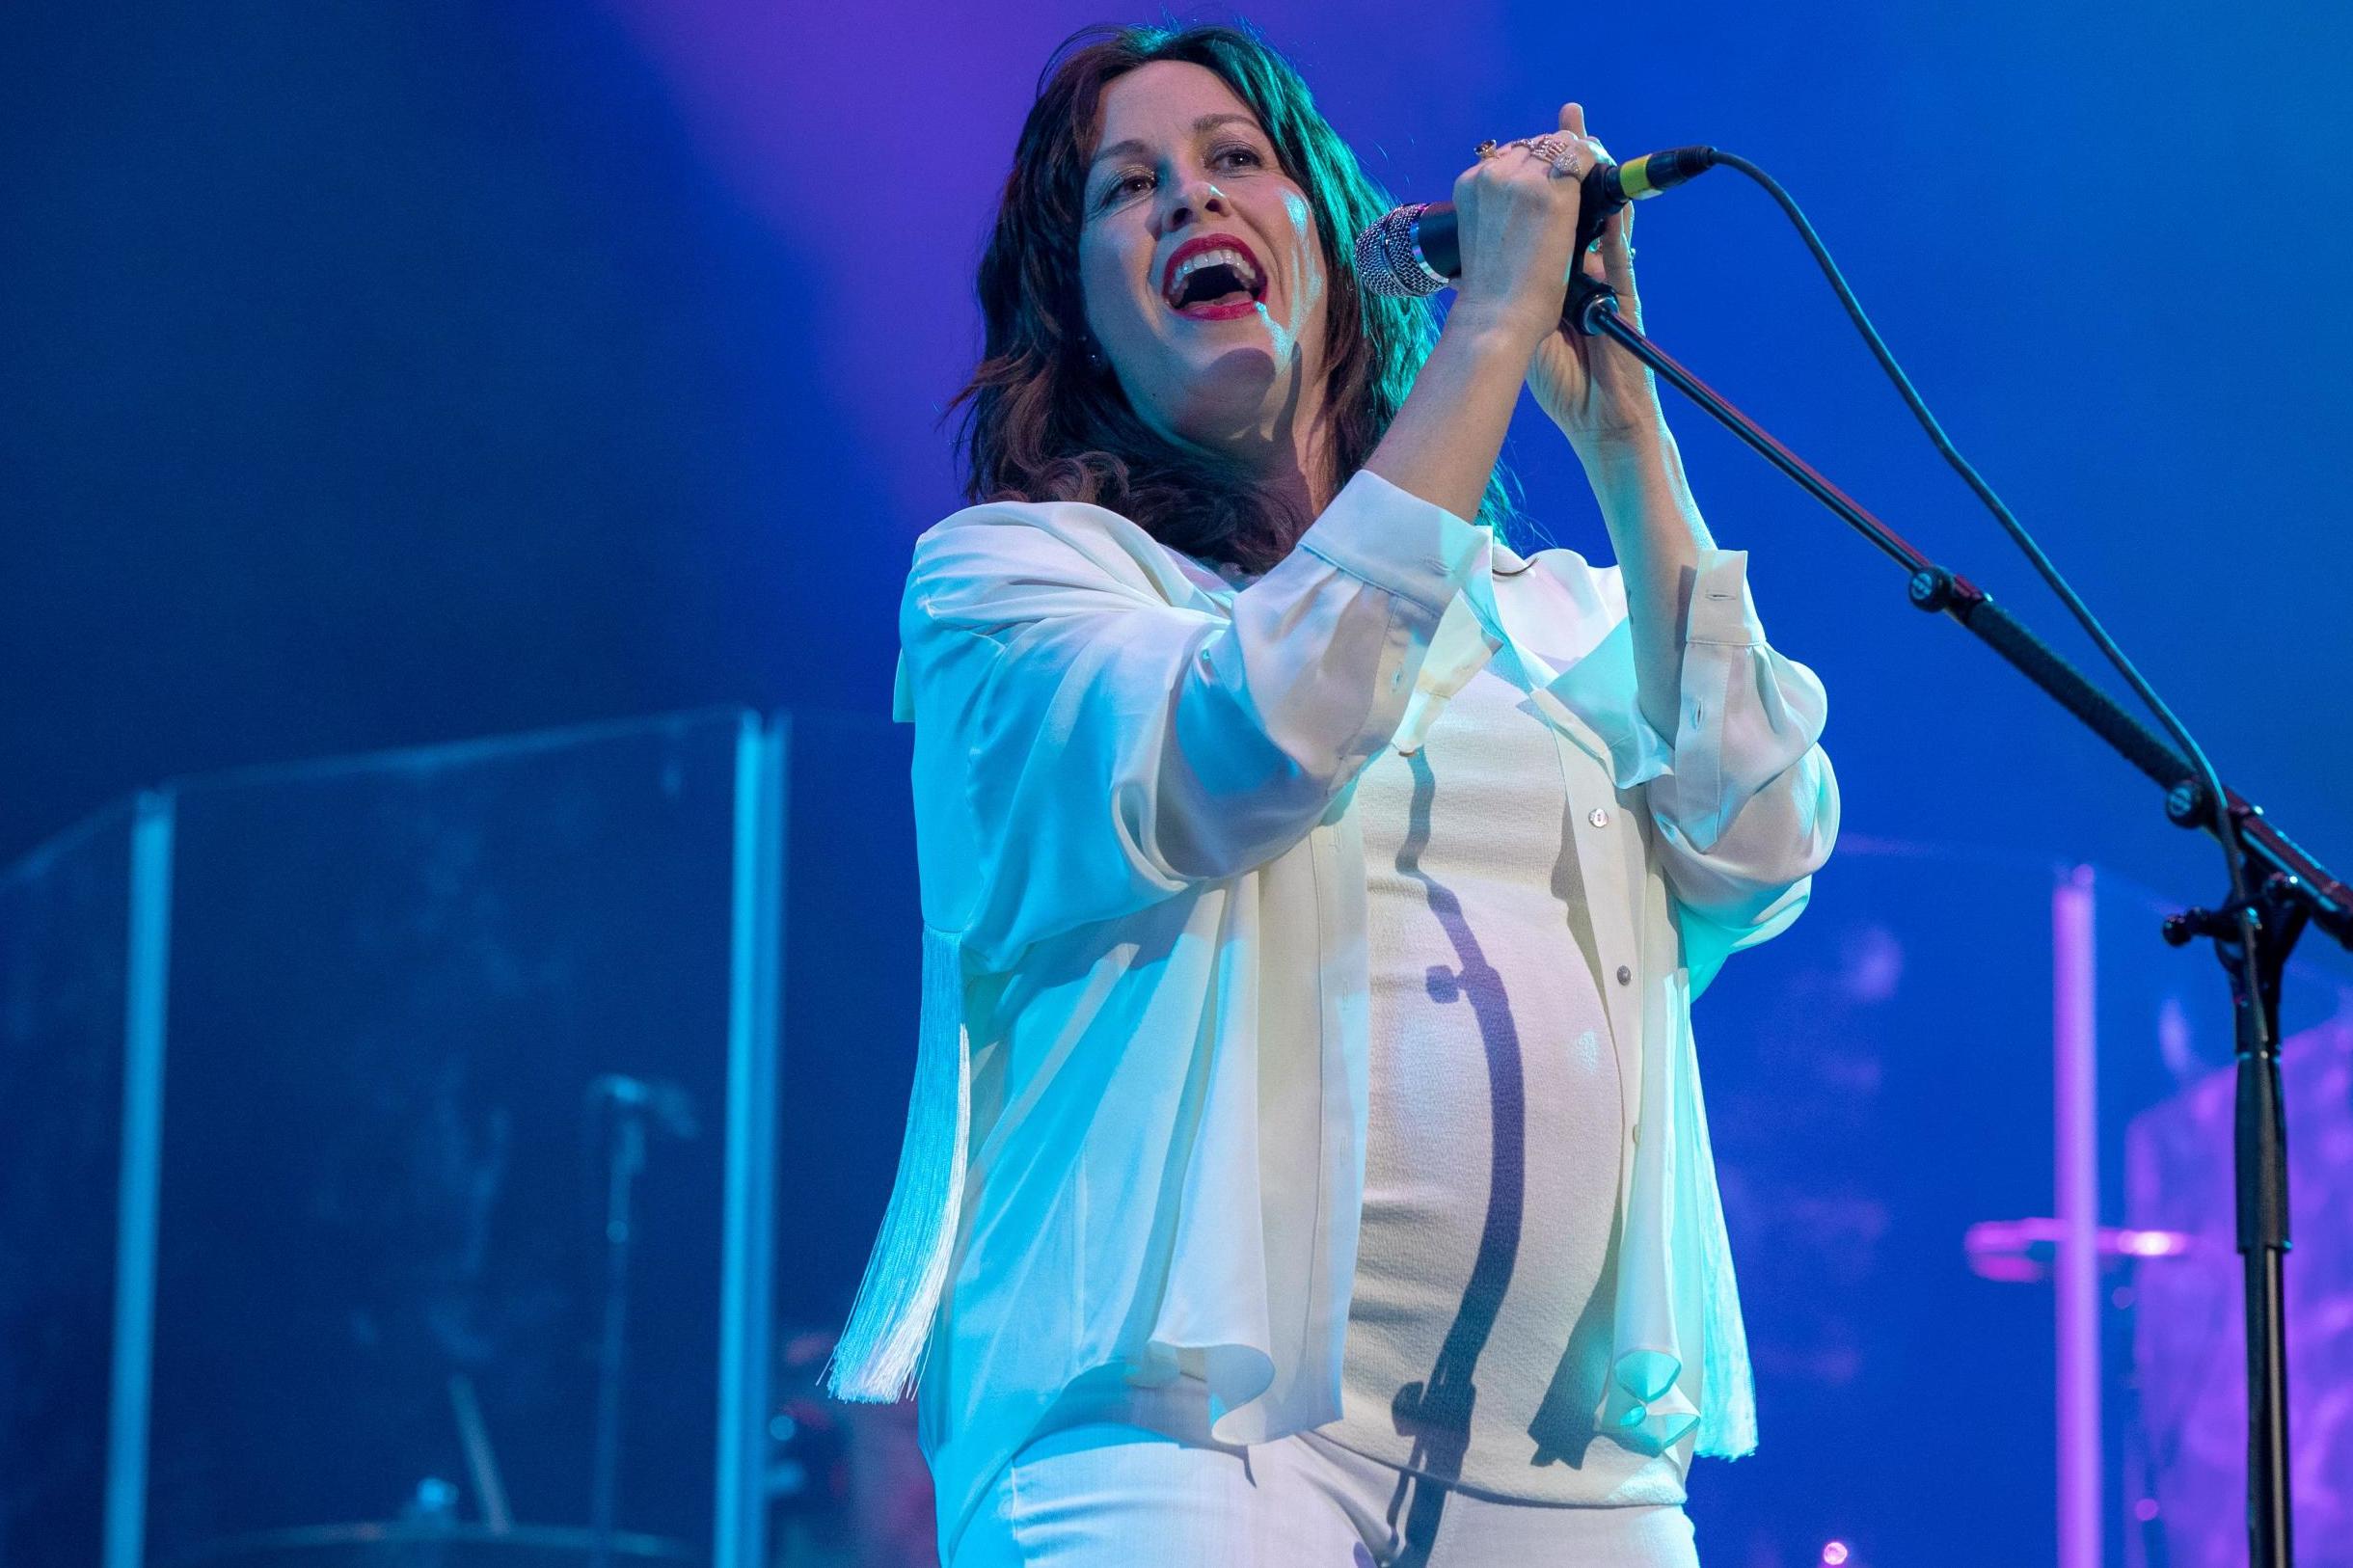 Jagged Little Pill' turns 25 in 2020. alanis morissette - Independent ...